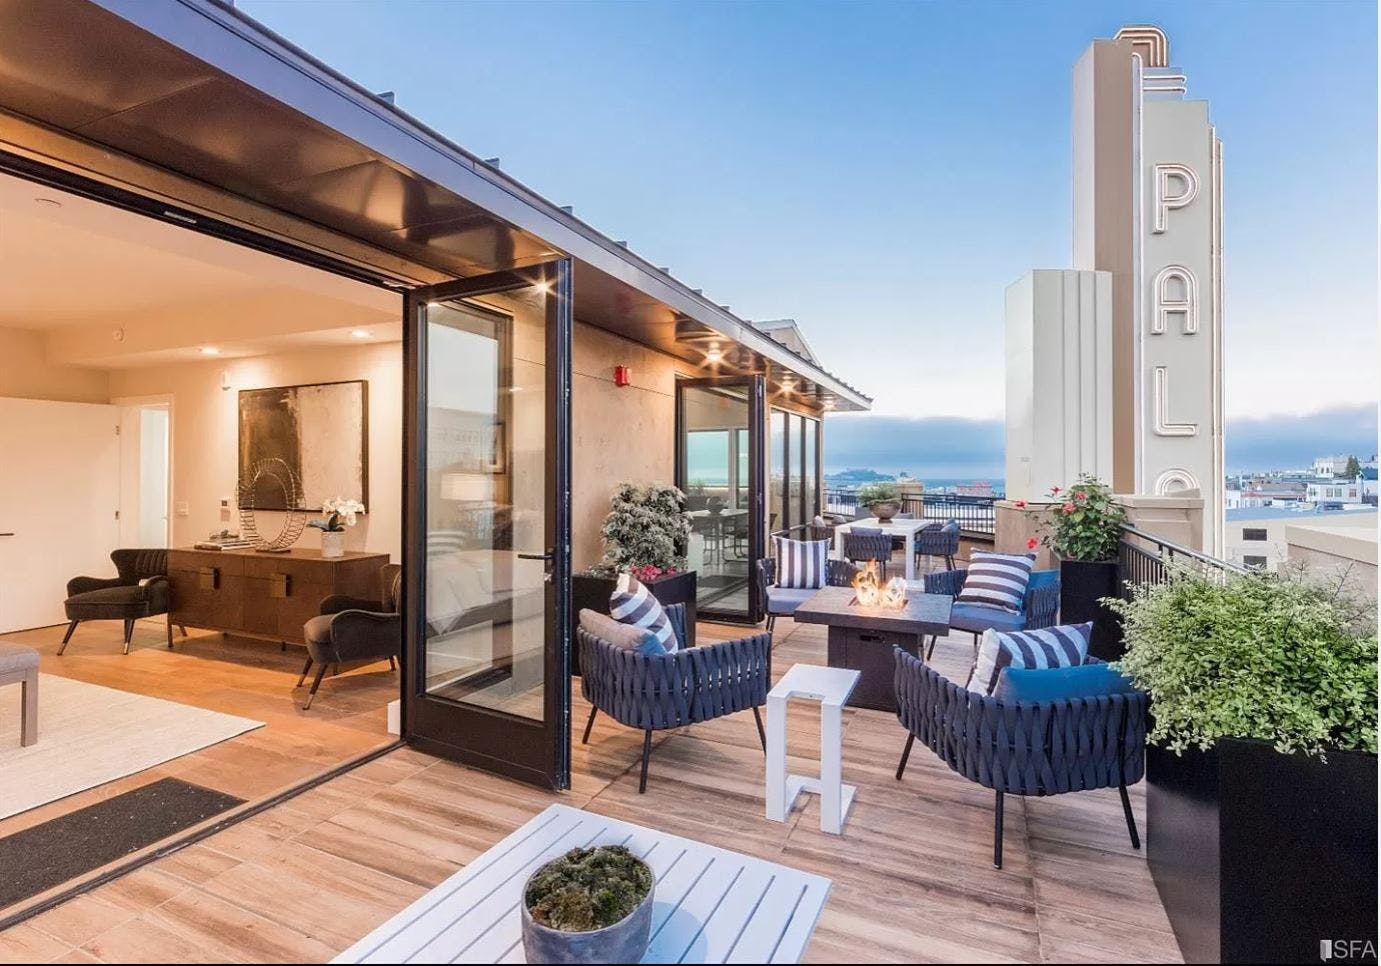 The Palace is a five story condominium in North Beach that mainly offers two-bedroom homes but does have a limited selection of one-bedroom or penthouse apartments.